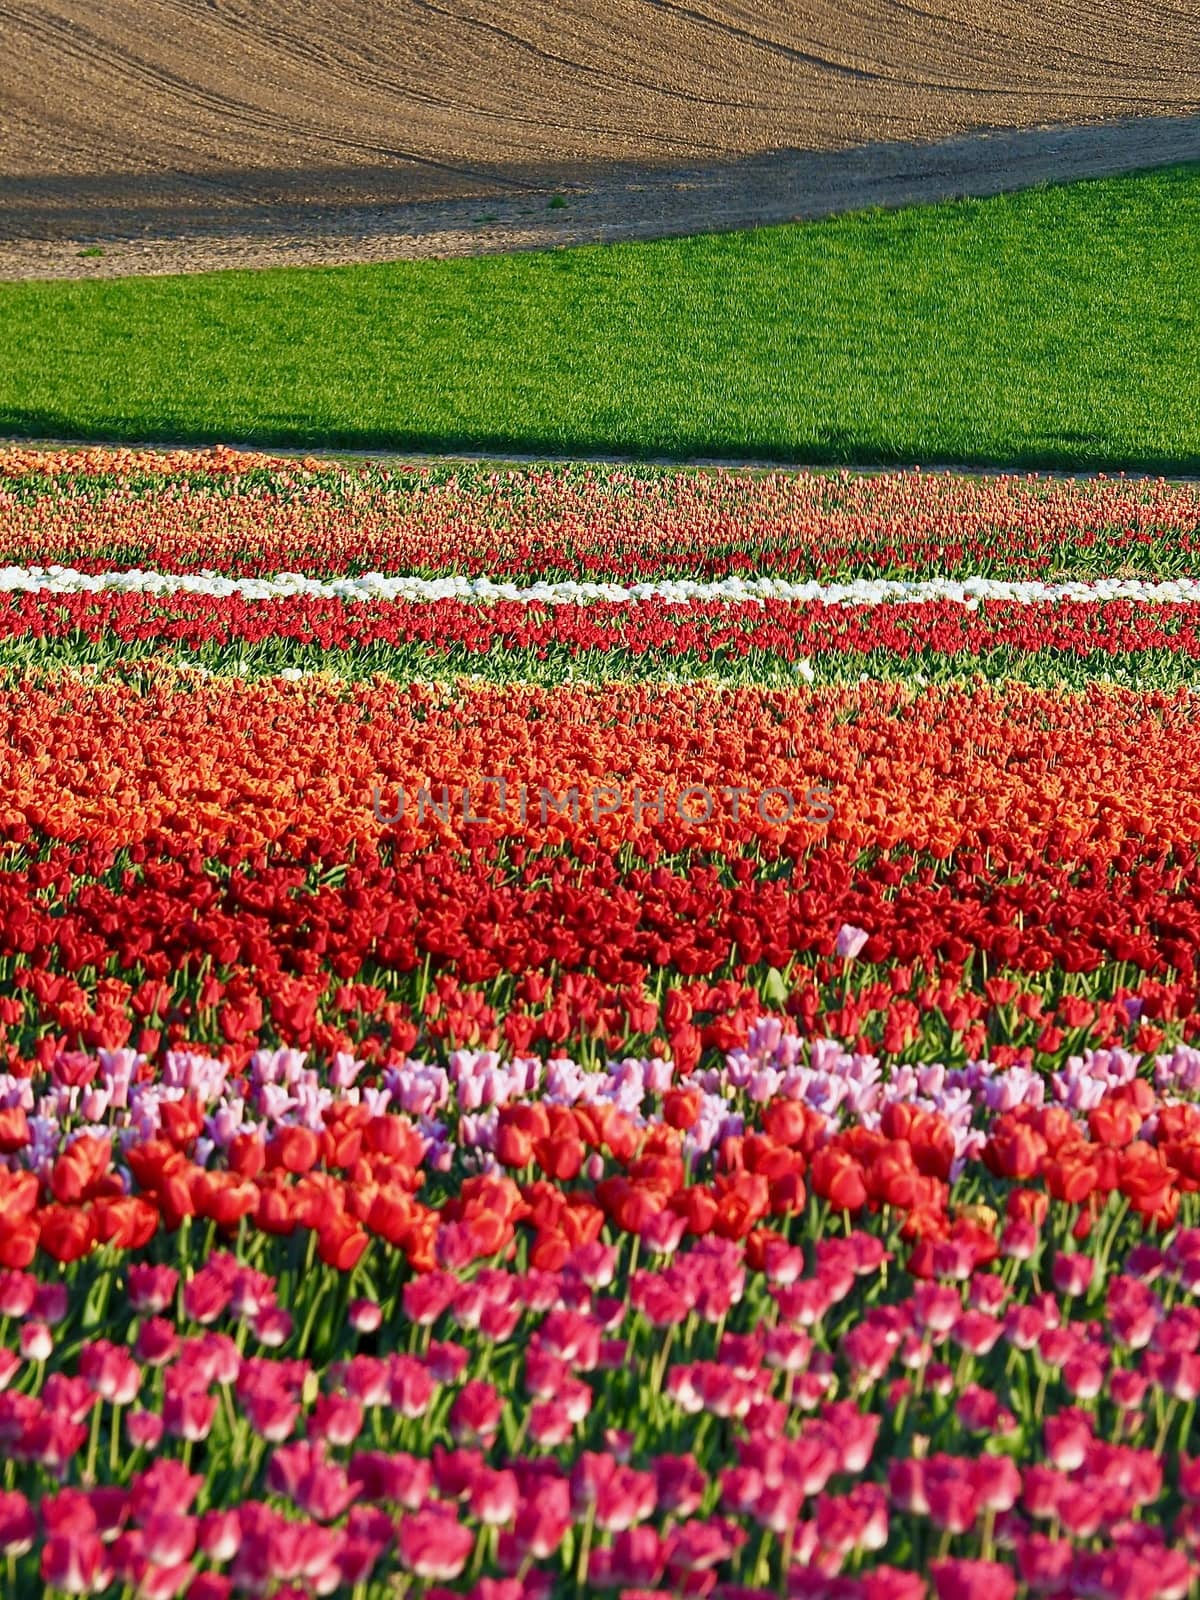 Agriculture - Colorful blooming tulip field in Grevenbroich by Stimmungsbilder